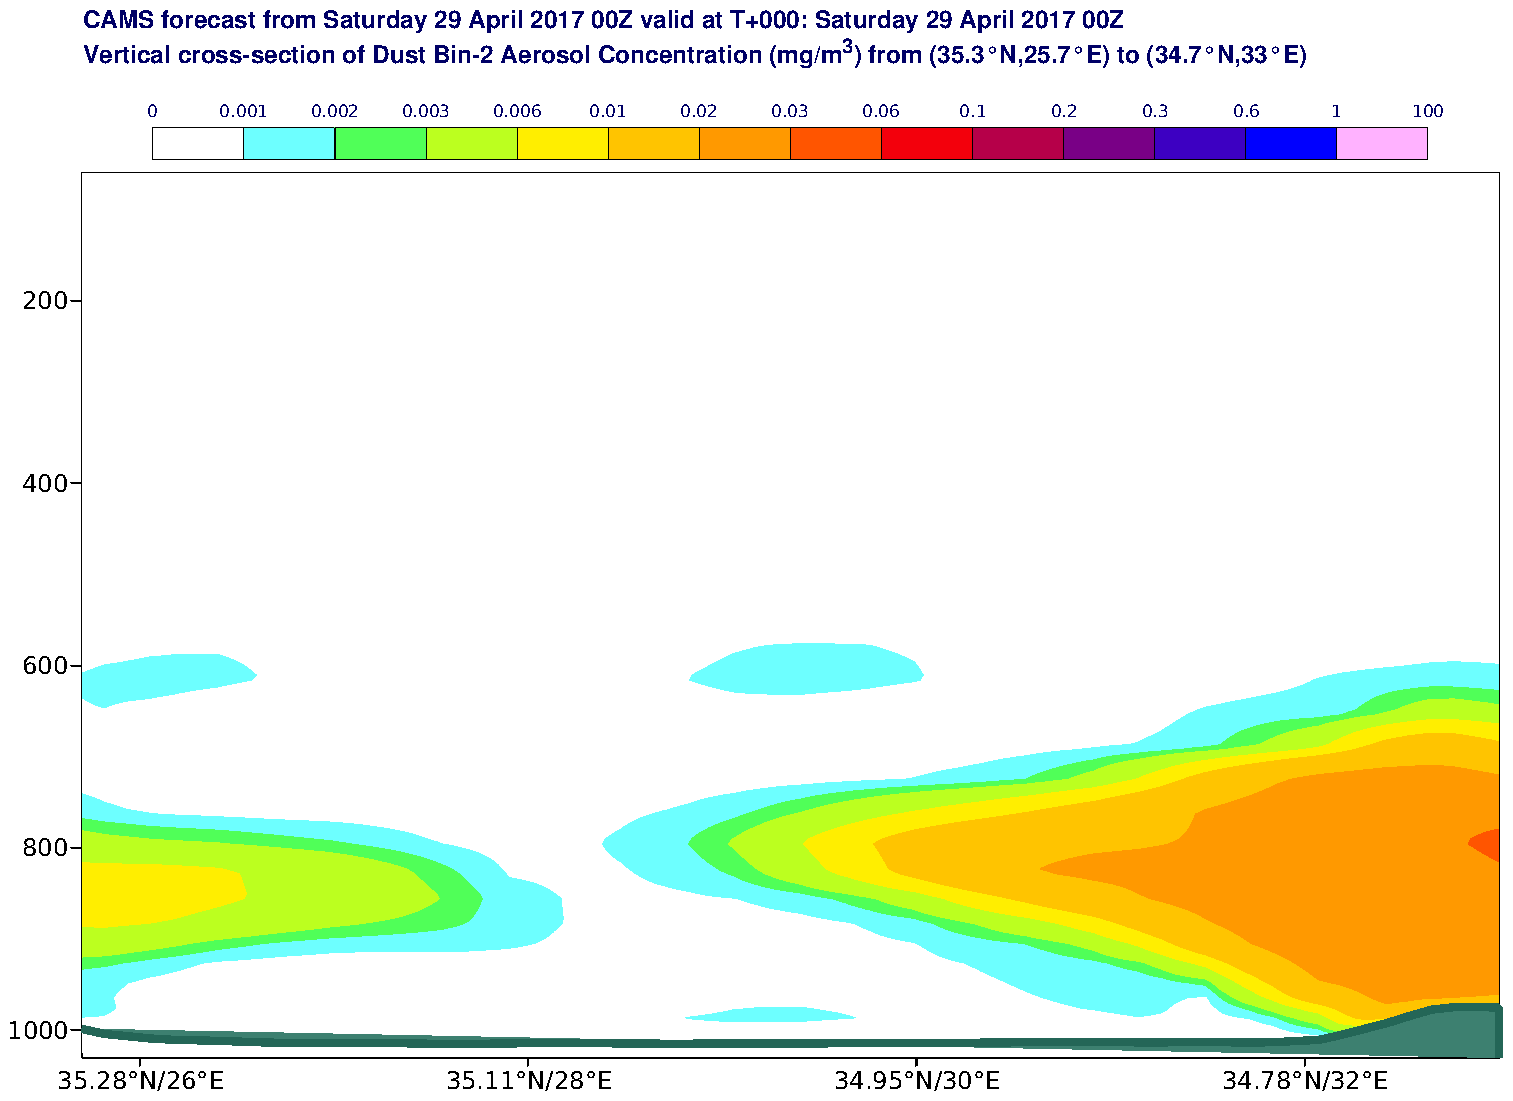 Vertical cross-section of Dust Bin-2 Aerosol Concentration (mg/m3) valid at T0 - 2017-04-29 00:00